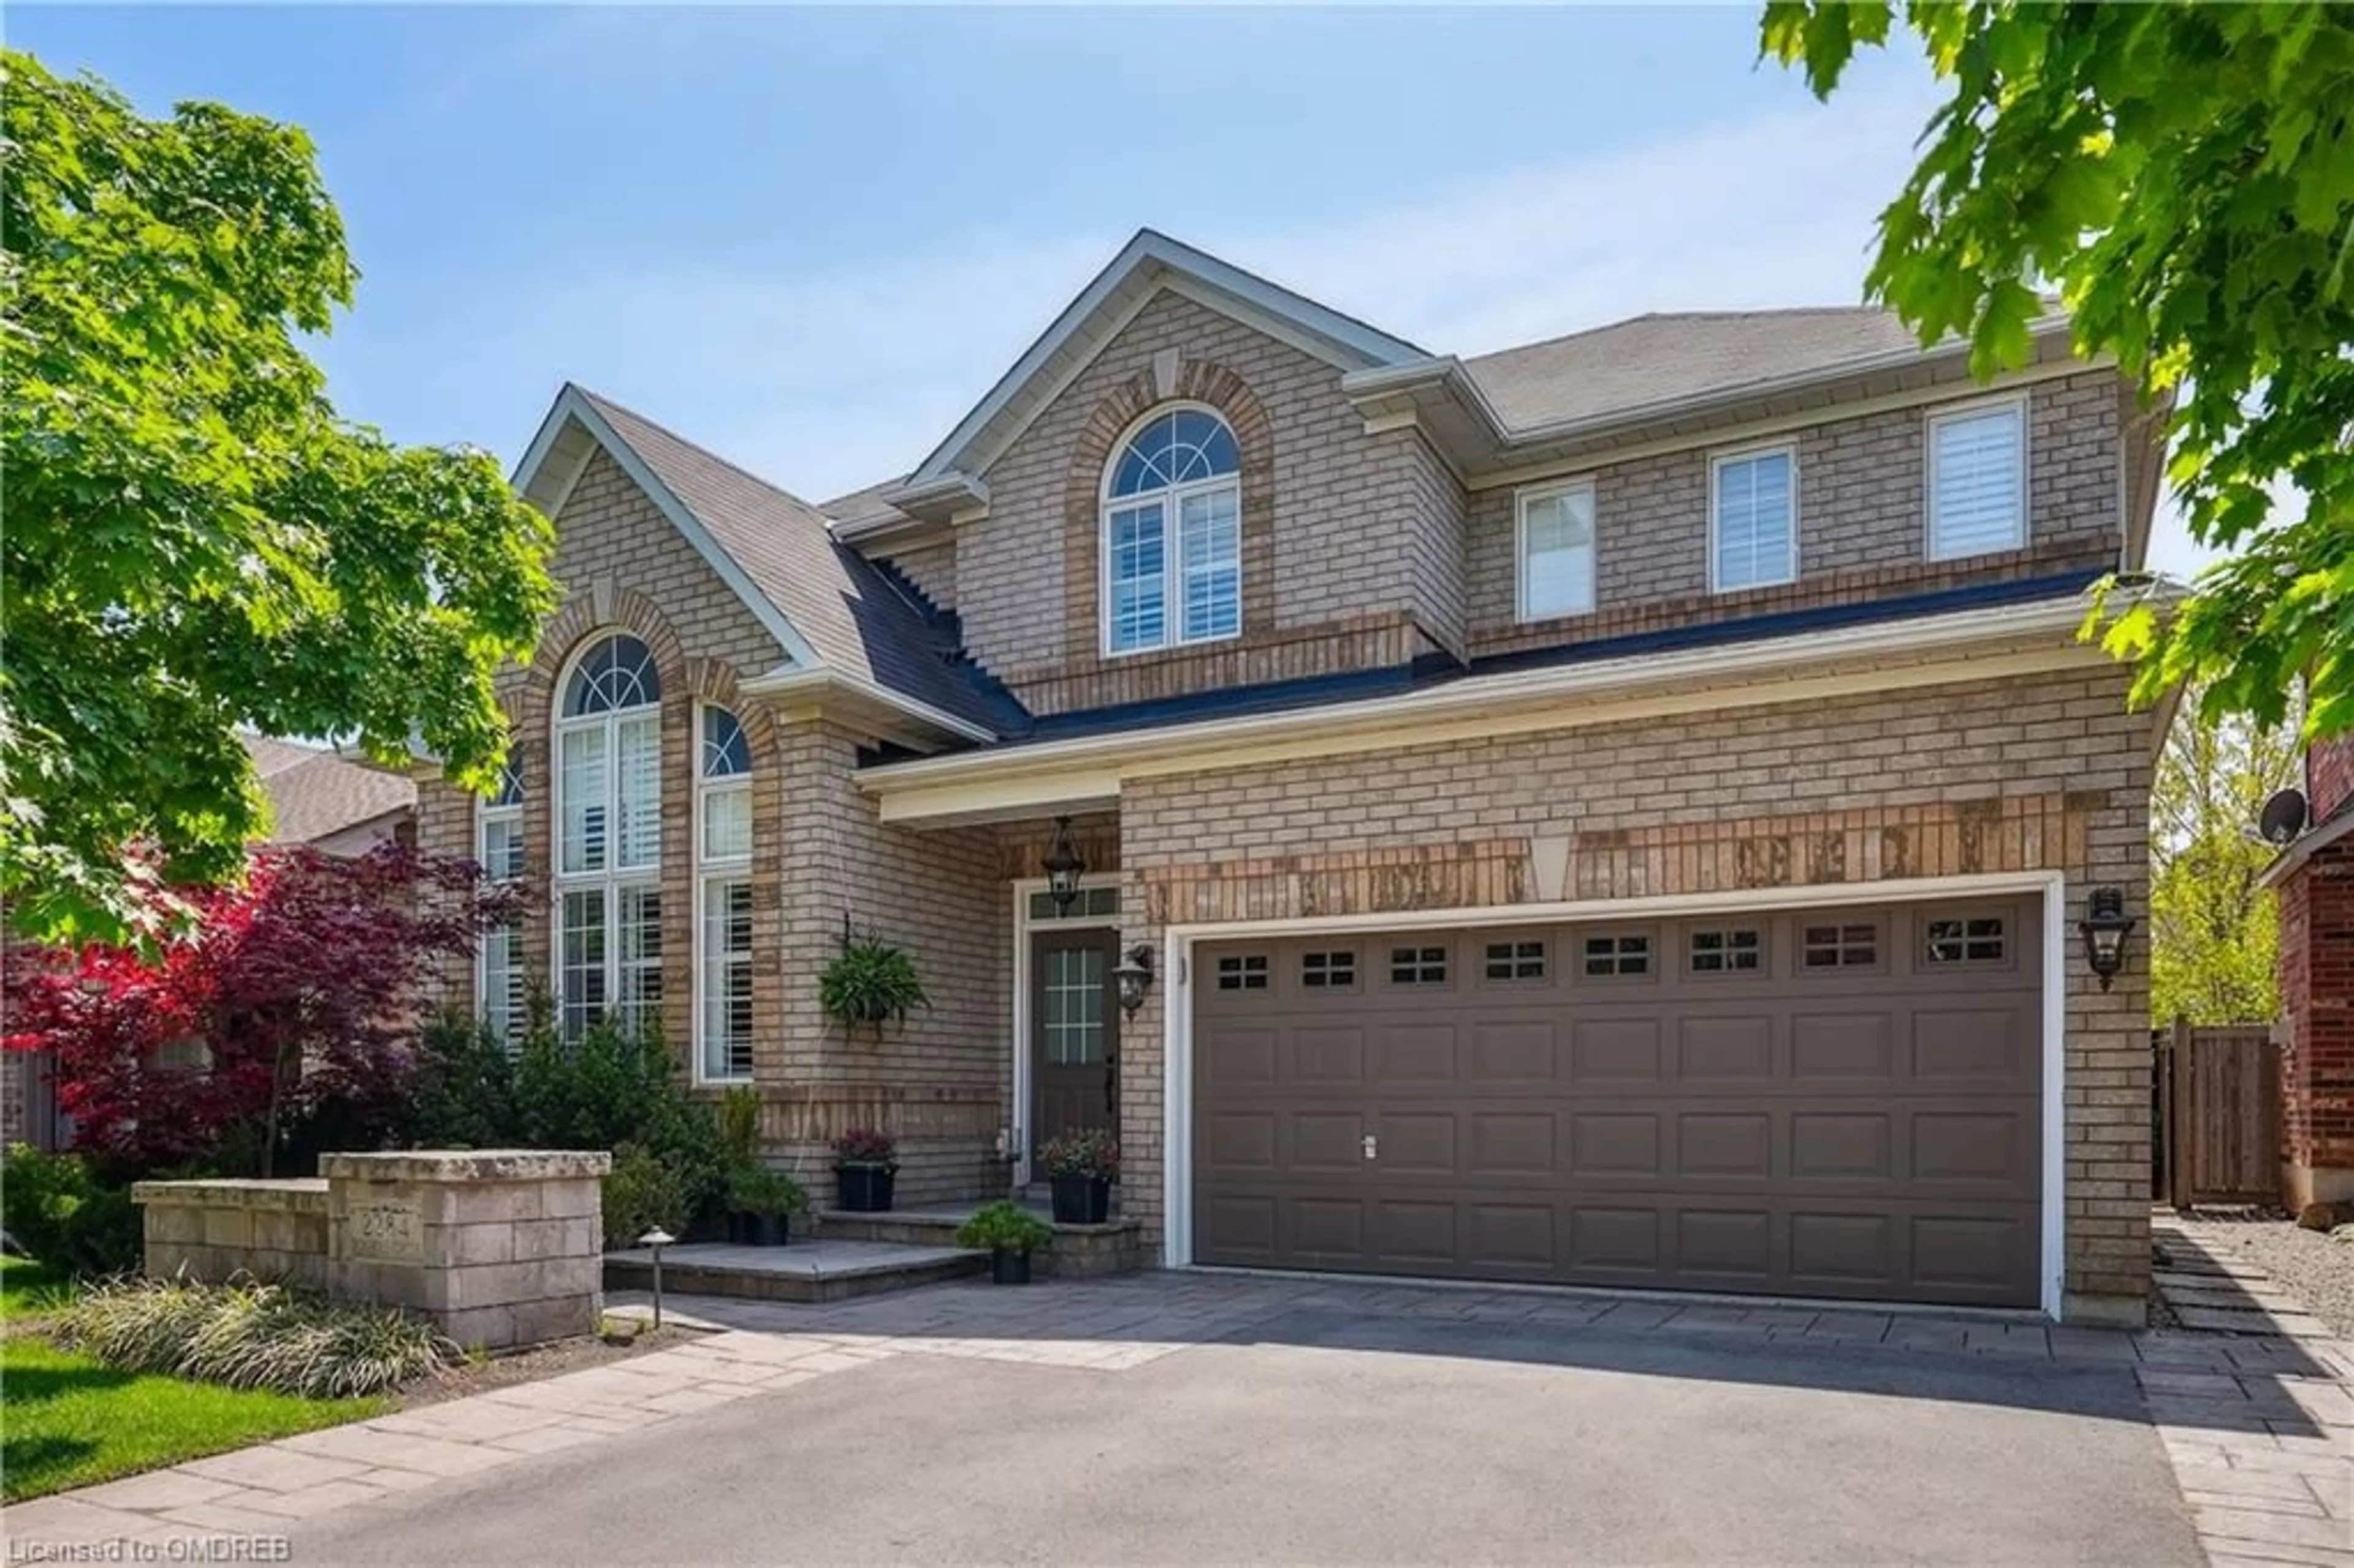 Home with brick exterior material for 2284 Foxhole Cir, Oakville Ontario L6M 4X4